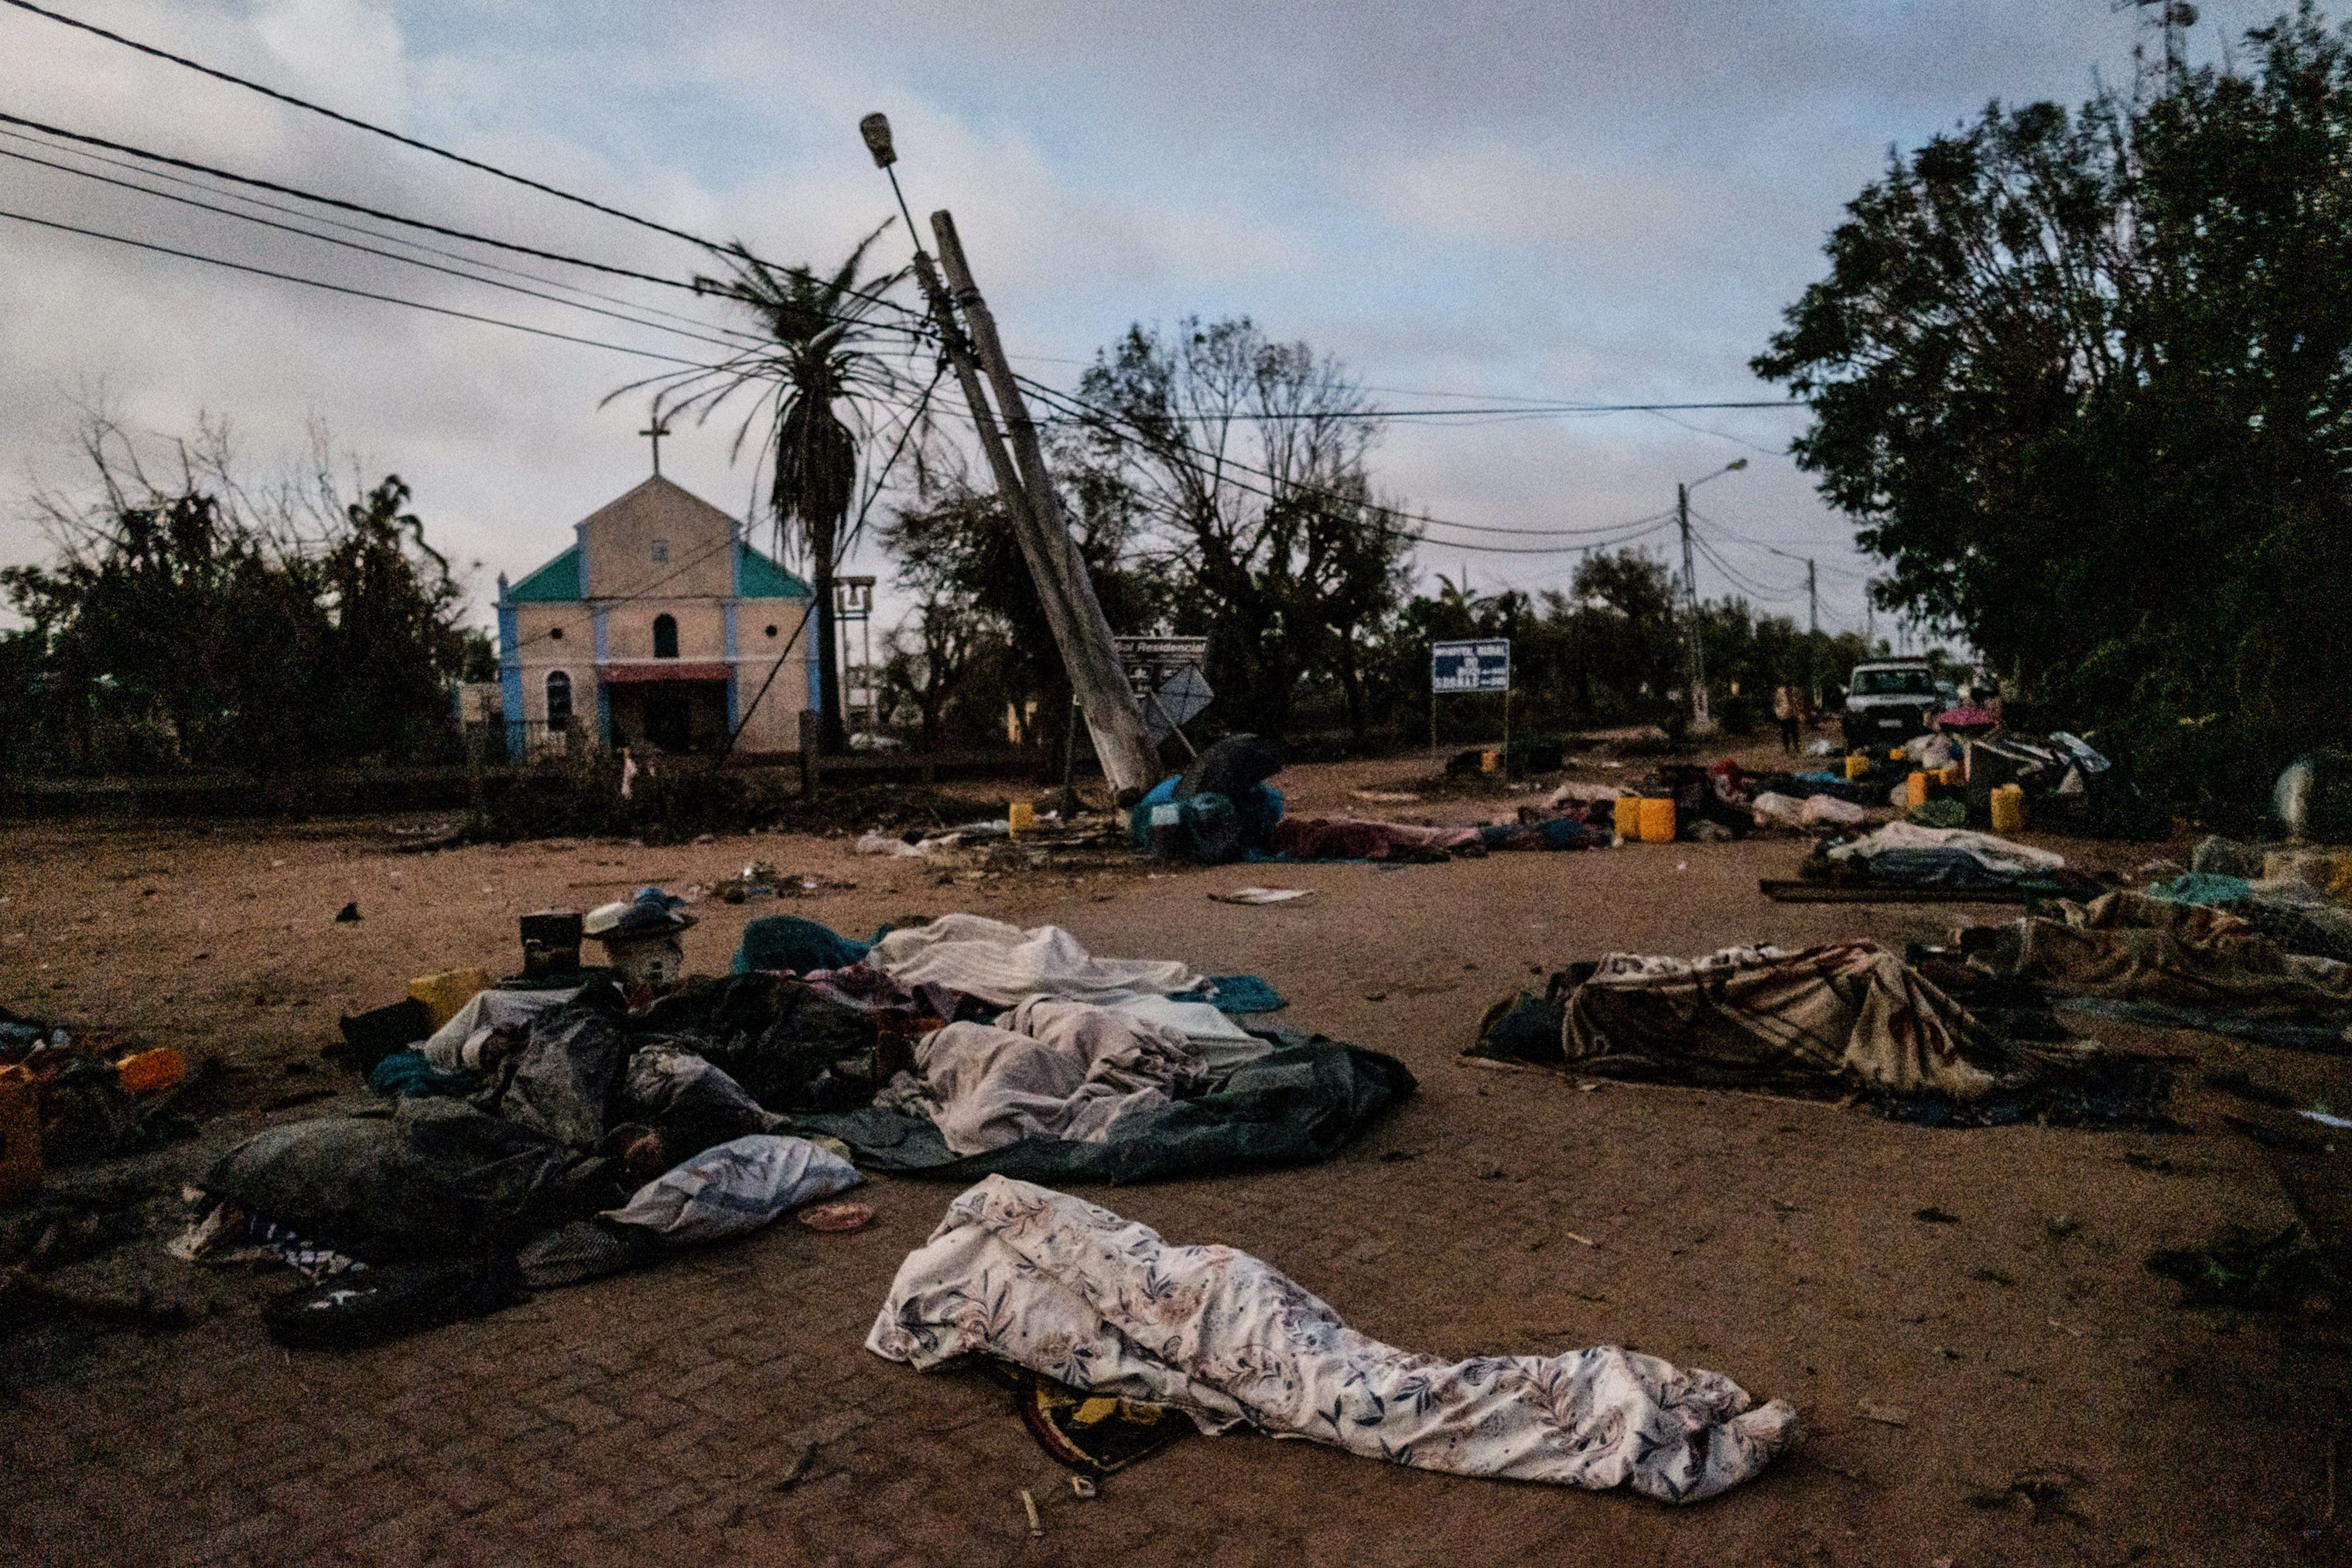 People who lost their home after cyclone Idai hit sleep on a street in Buzi, Mozambique, on March 23, 2019. (Yasuyoshi Chiba—AFP/Getty Images)